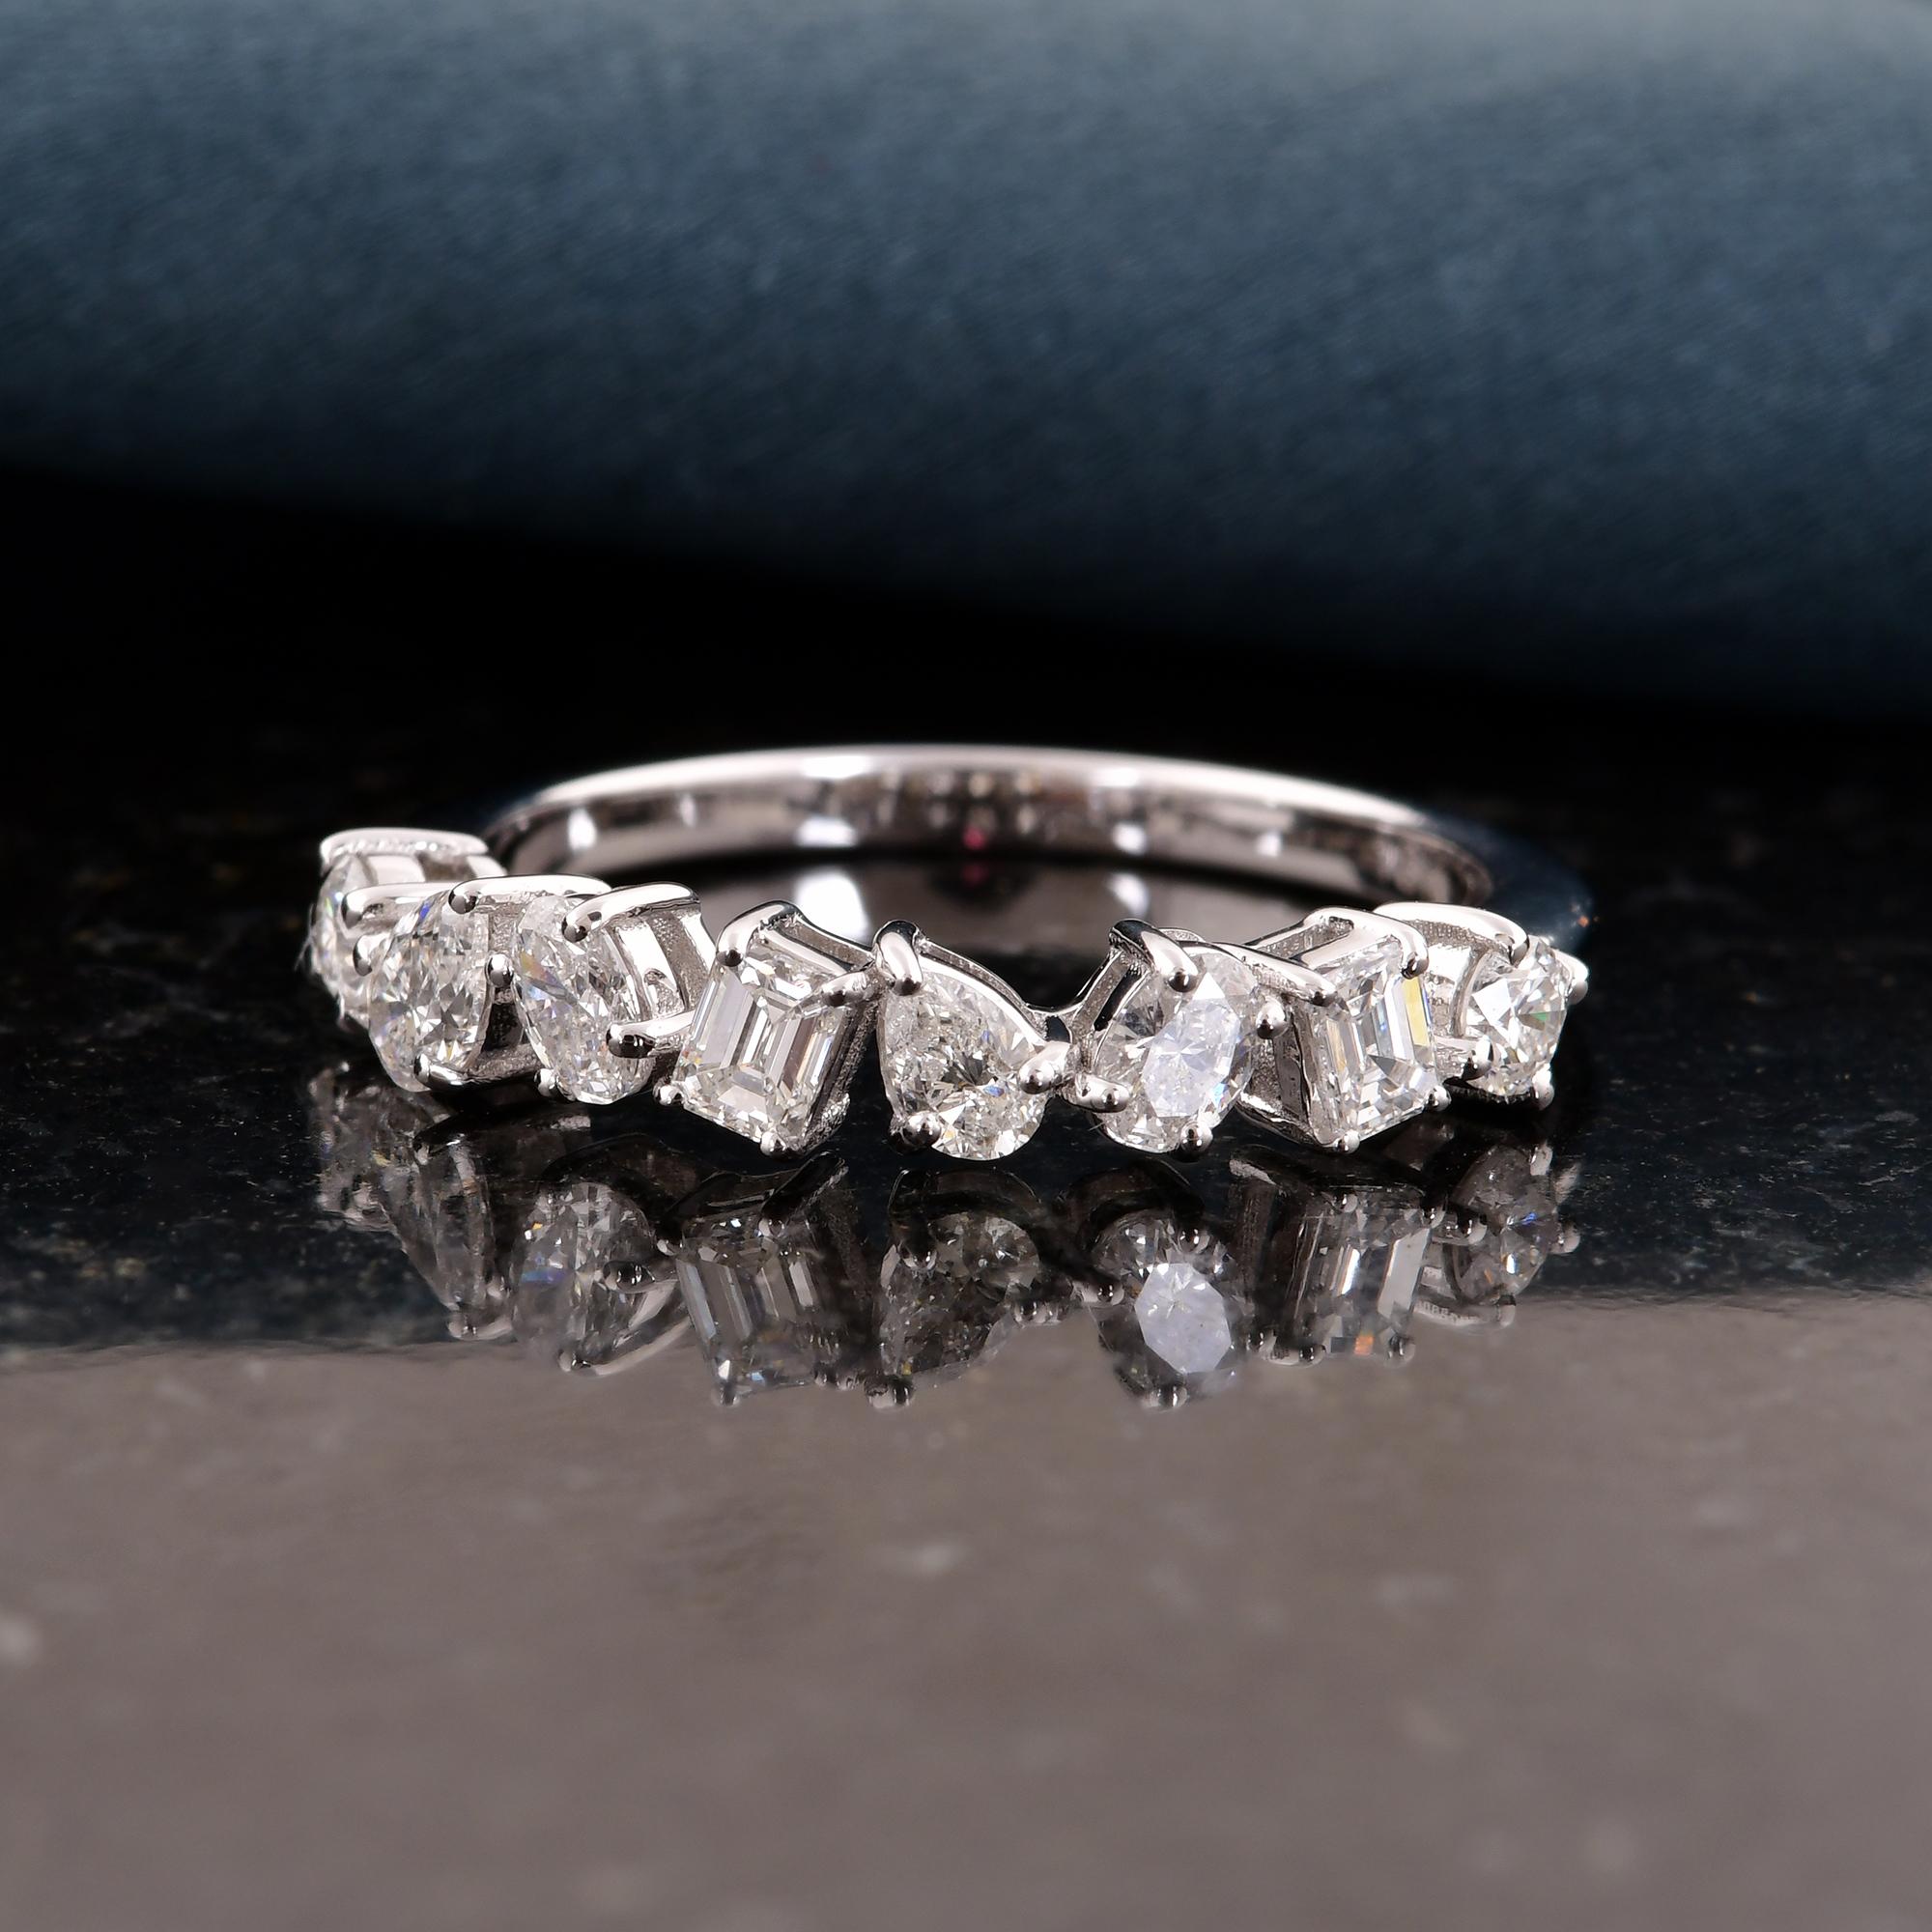 What sets this ring apart is its unique design featuring multi-shape diamonds. From classic round brilliants to elegant pear shapes and enchanting princess cuts, each diamond adds its own distinctive charm to the composition, creating a harmonious